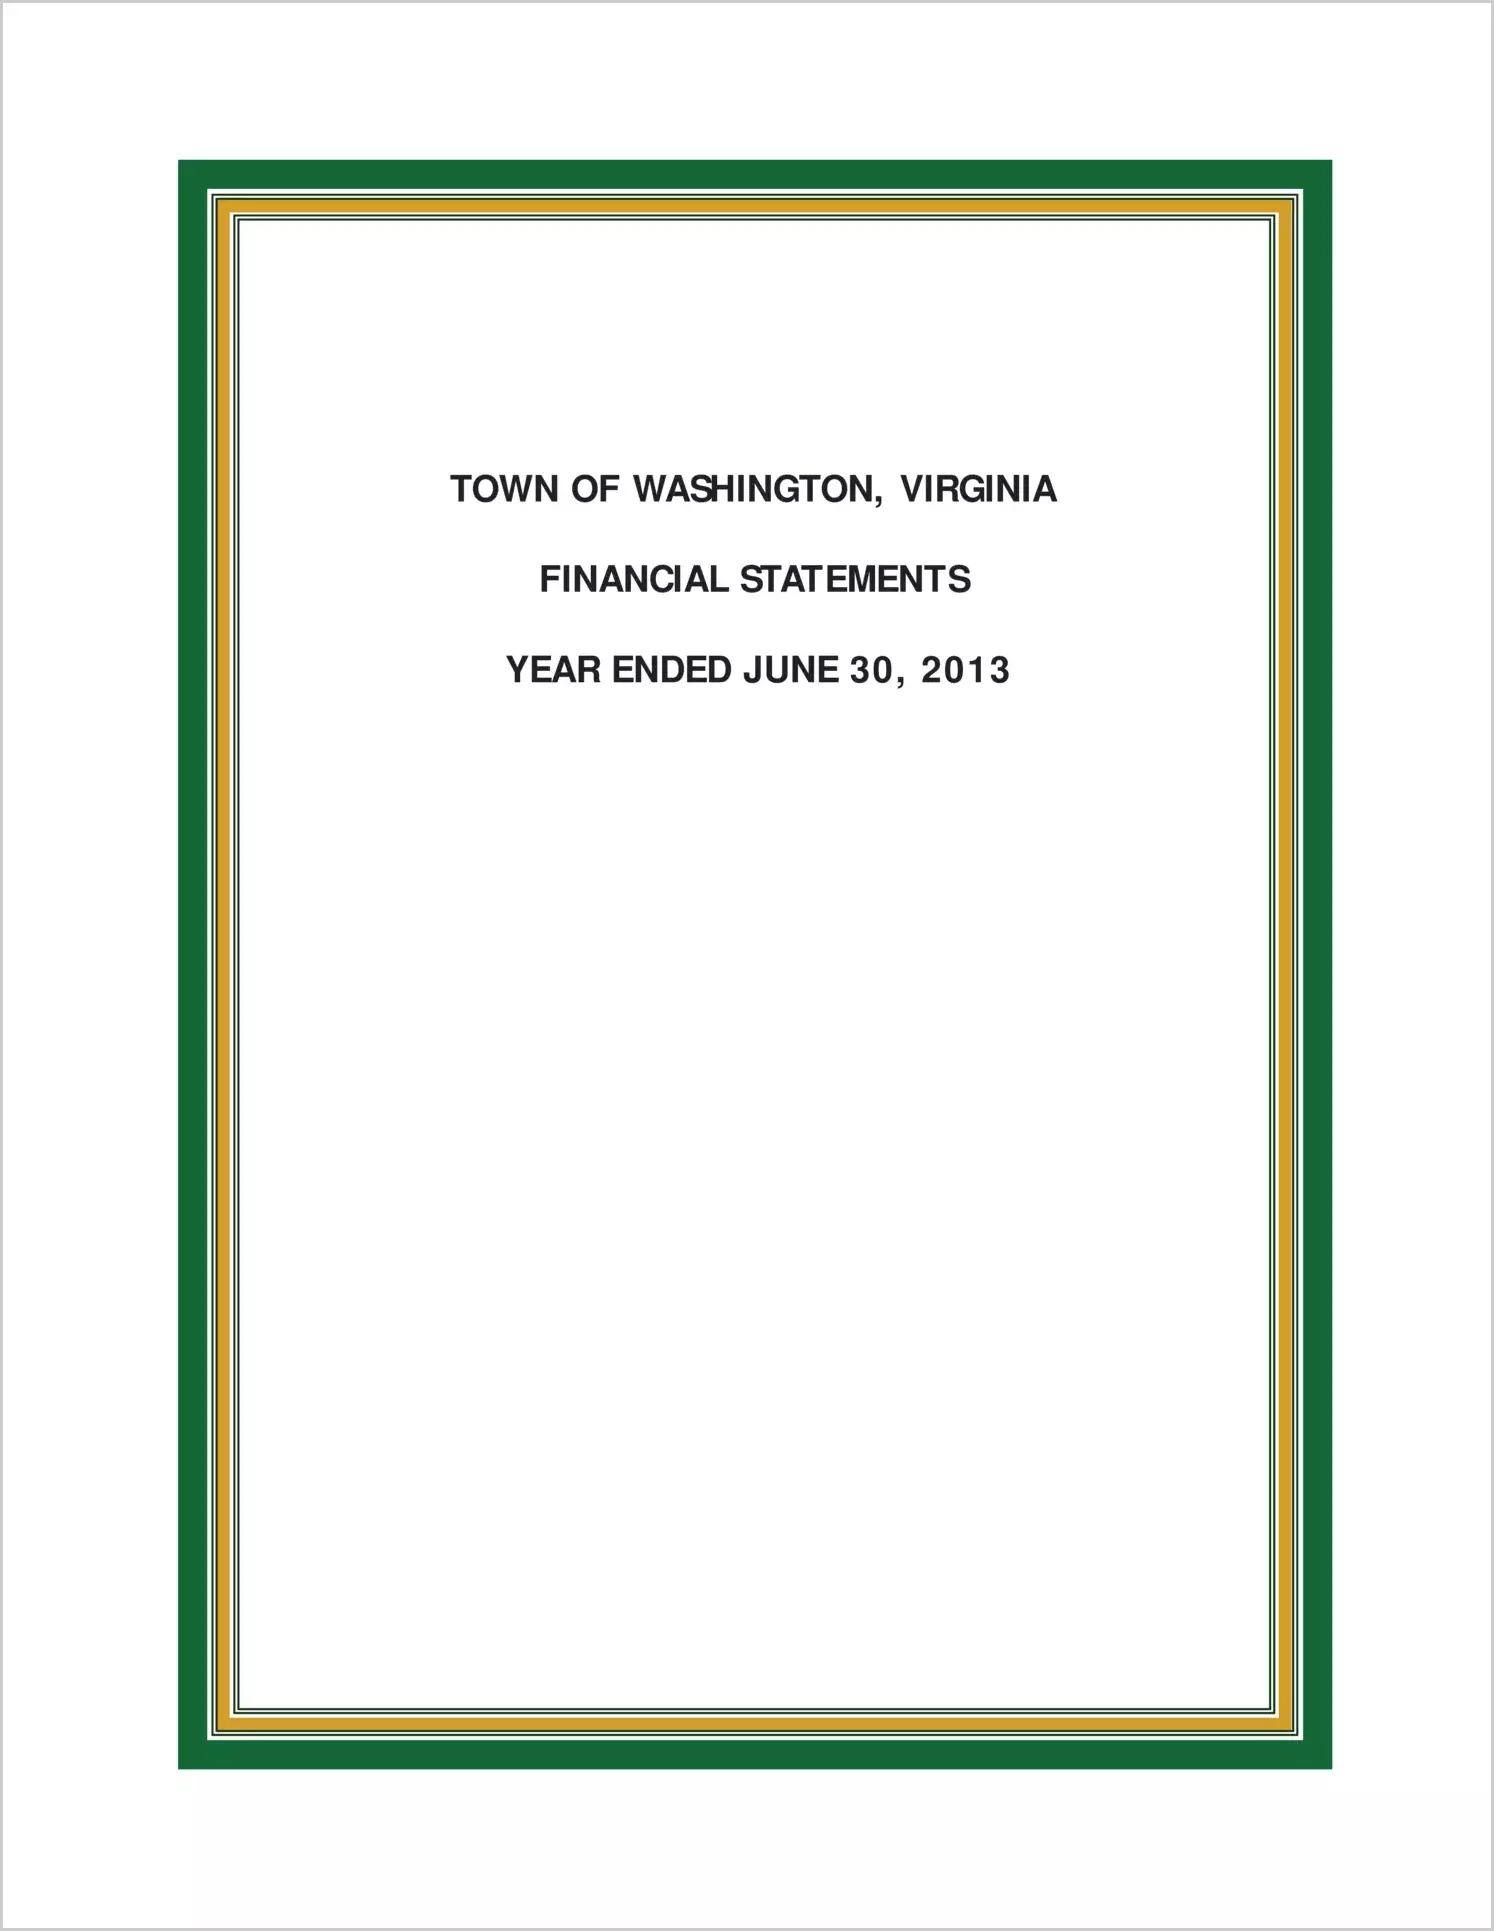 2013 Annual Financial Report for Town of Washington